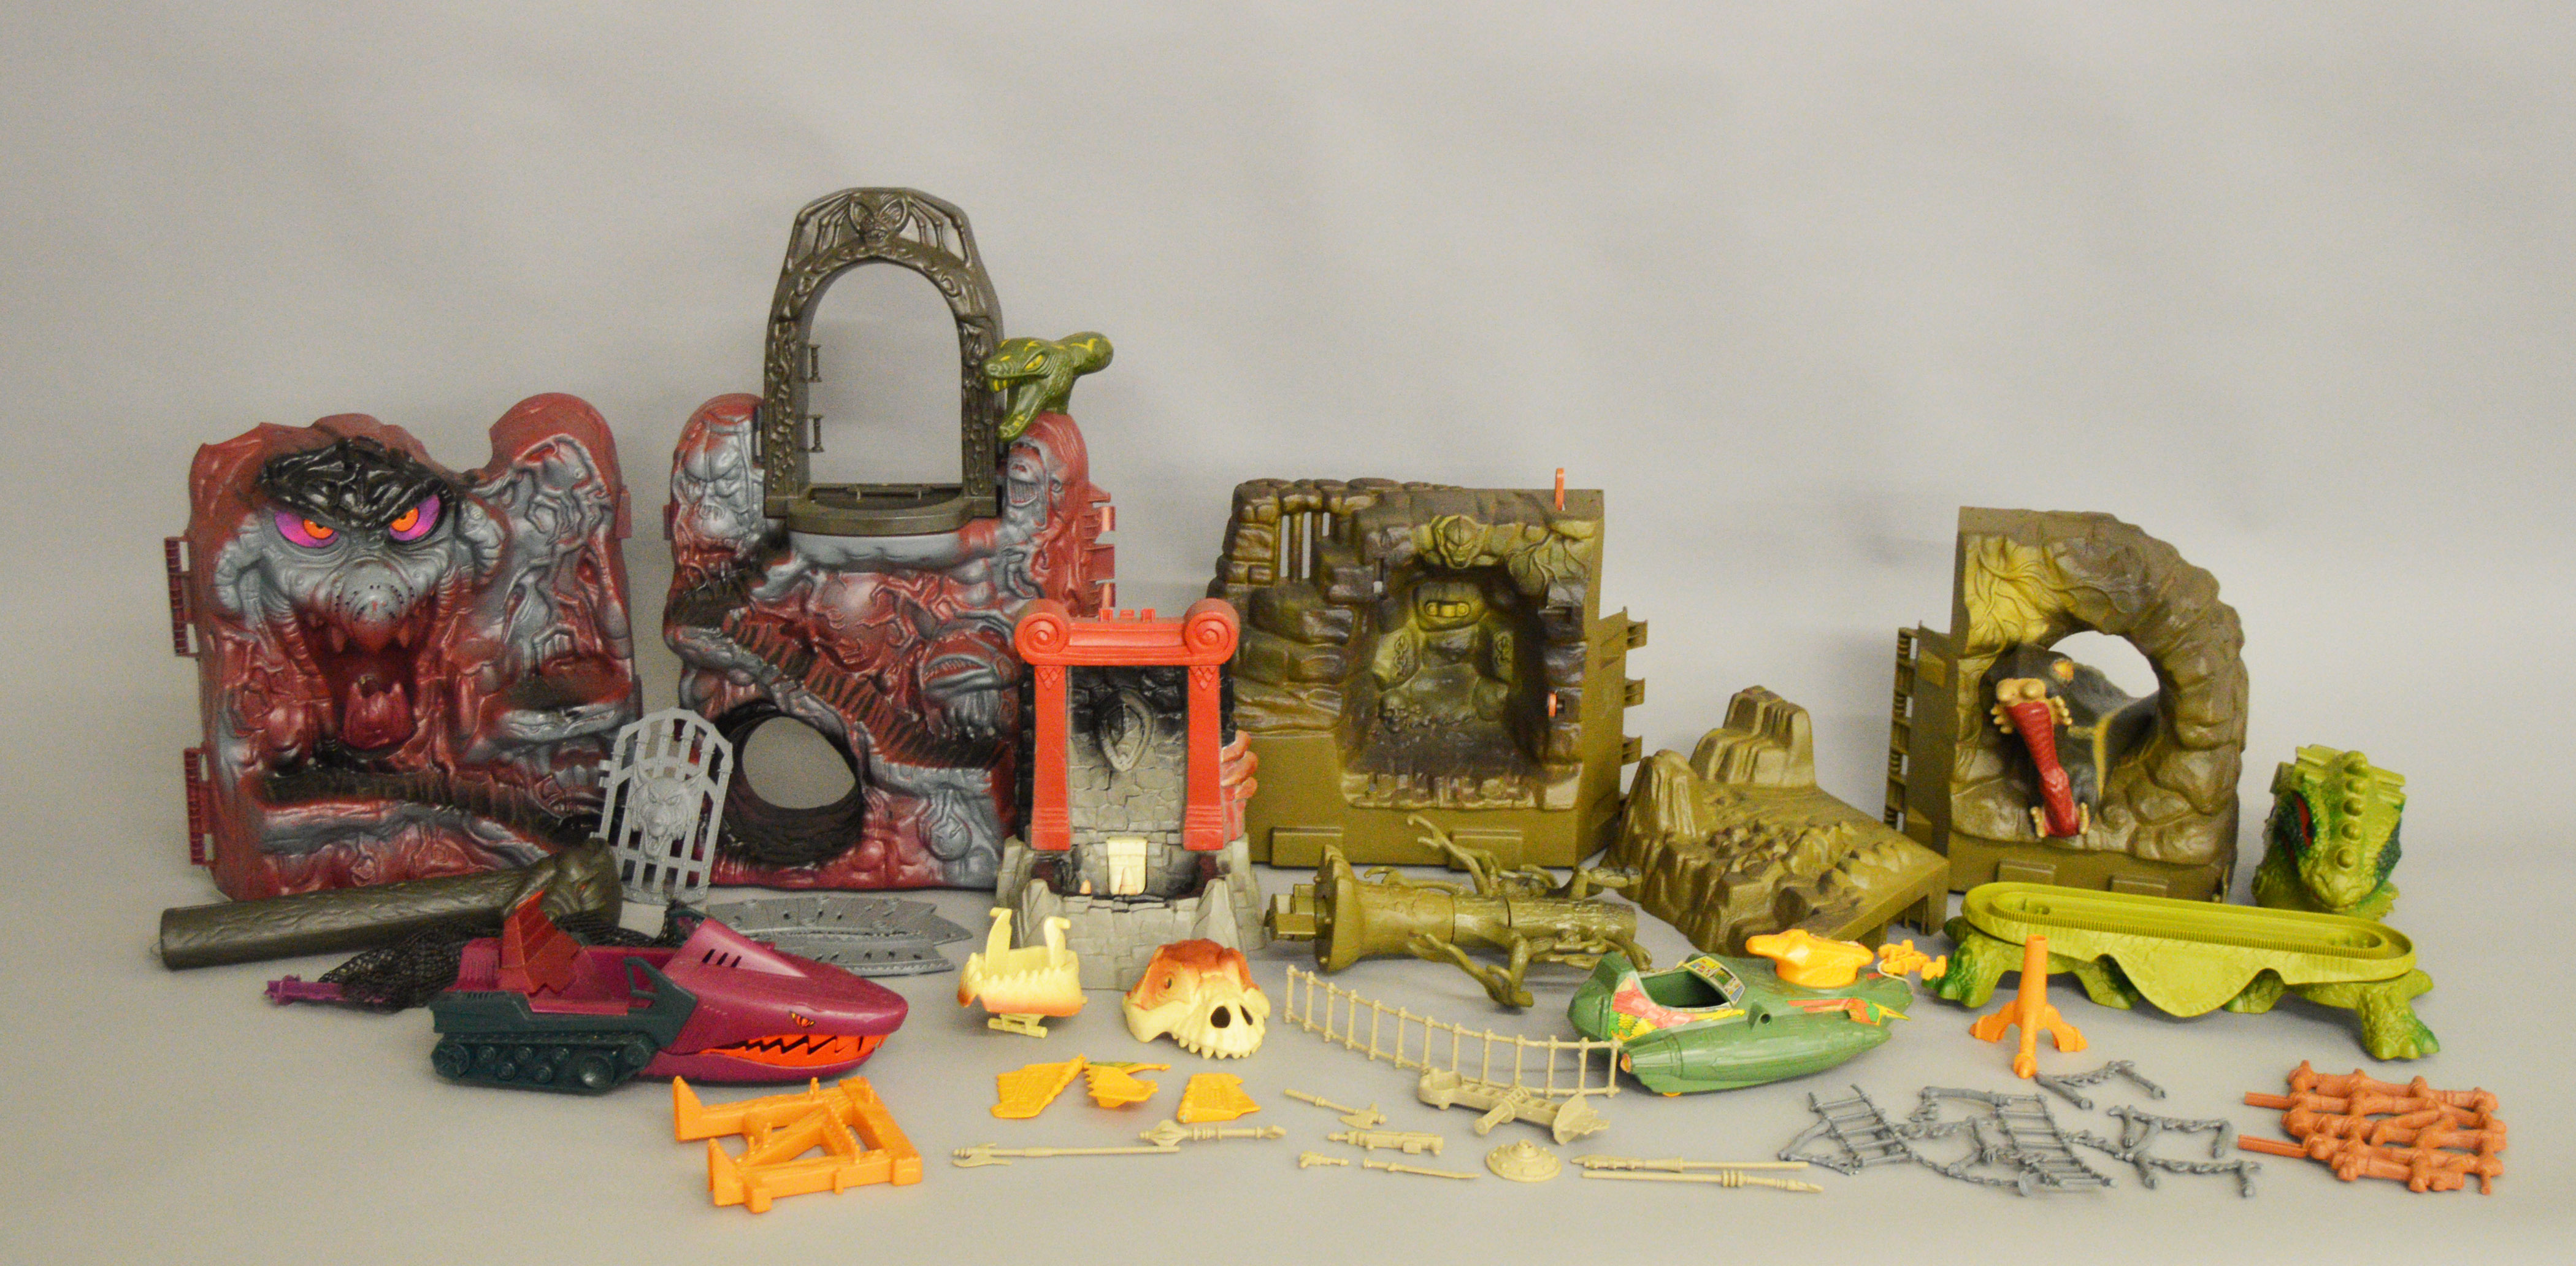 he man playsets